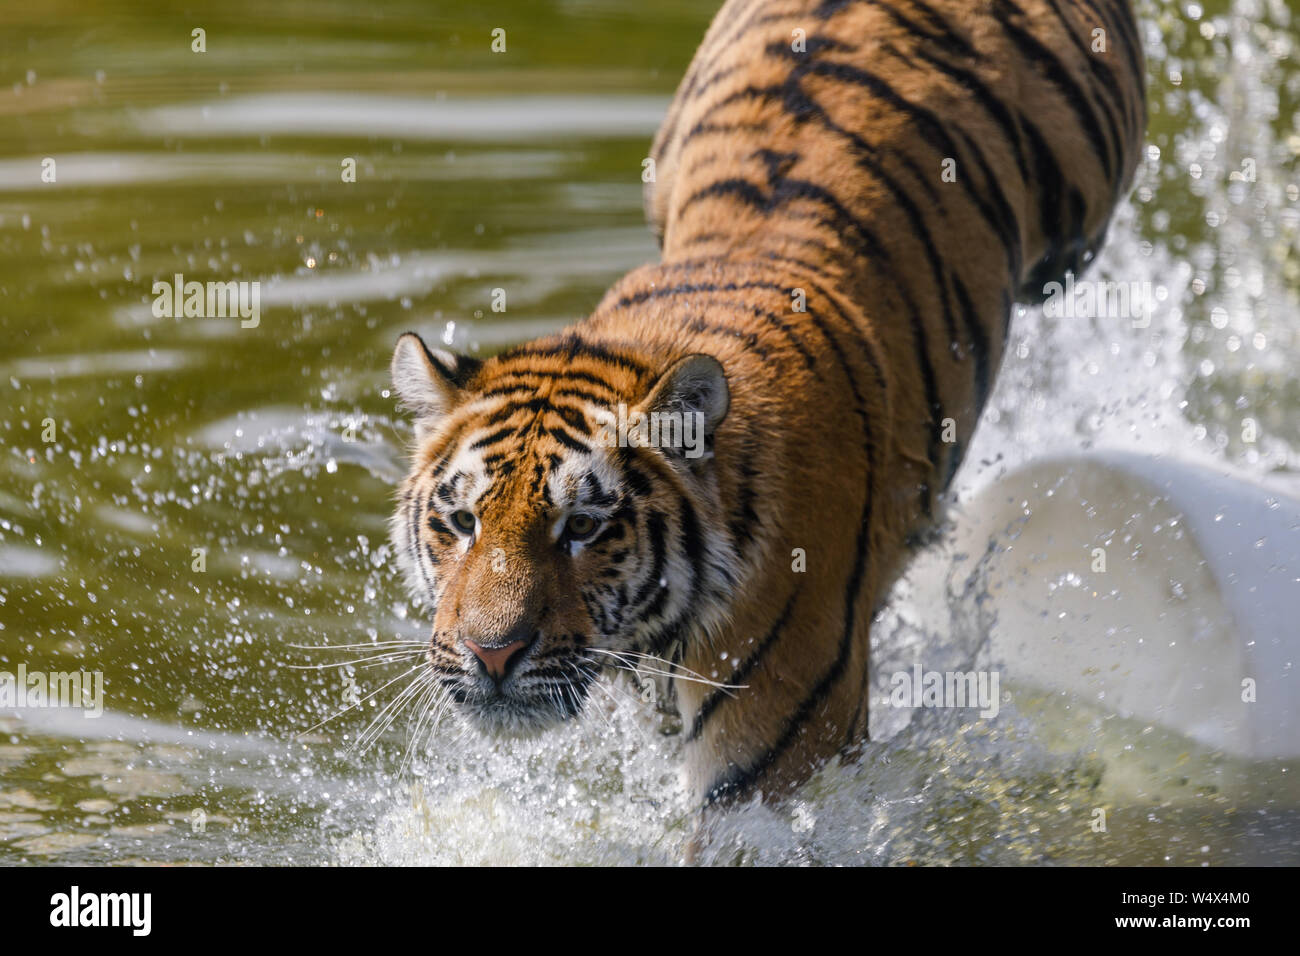 ZSL Whipsnade Zoo, Bedfordshire. 25th July 2019. UK Weather: Animals splash around in the water to cool down at ZSL Whipsnade Zoo.Record breaking heatwave, with temperatures of up to 39 degrees have been recorded across the UK.  13 month old Amur tiger cub, Makari, cools off in the pond in Tiger Falls, ZSL Whipsnade Zoo, UK Credit: Chris Aubrey/Alamy Live News Stock Photo